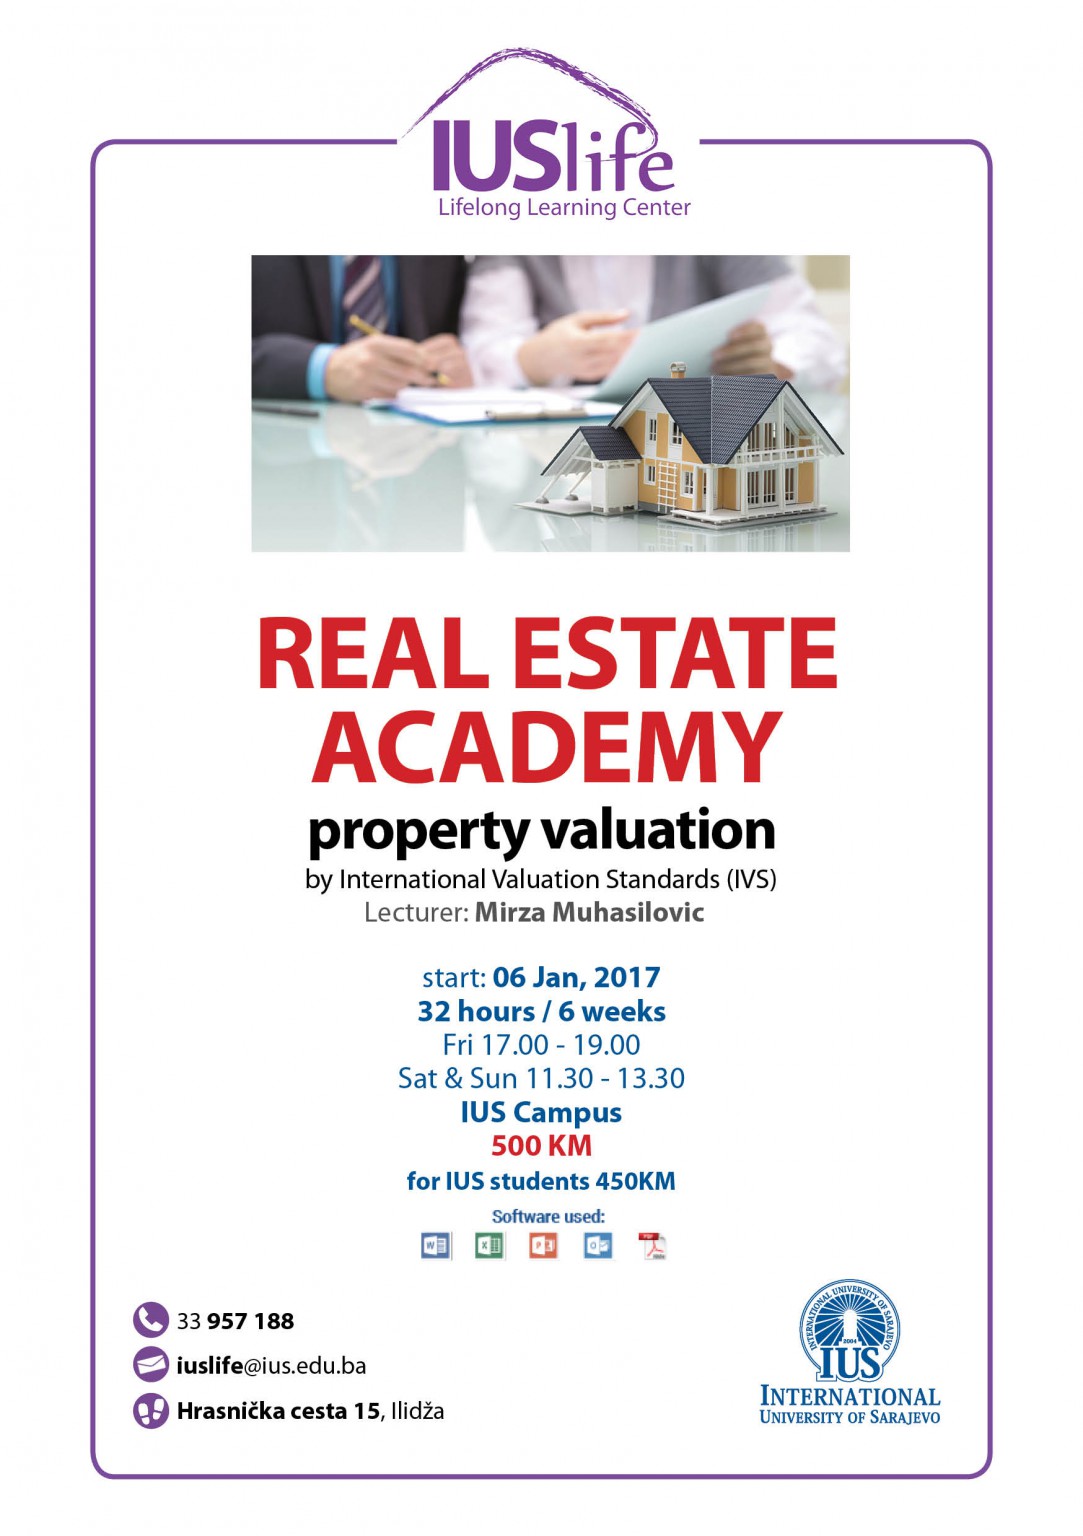  Real Estate Academy (property valuation by International Valuation Standards) 